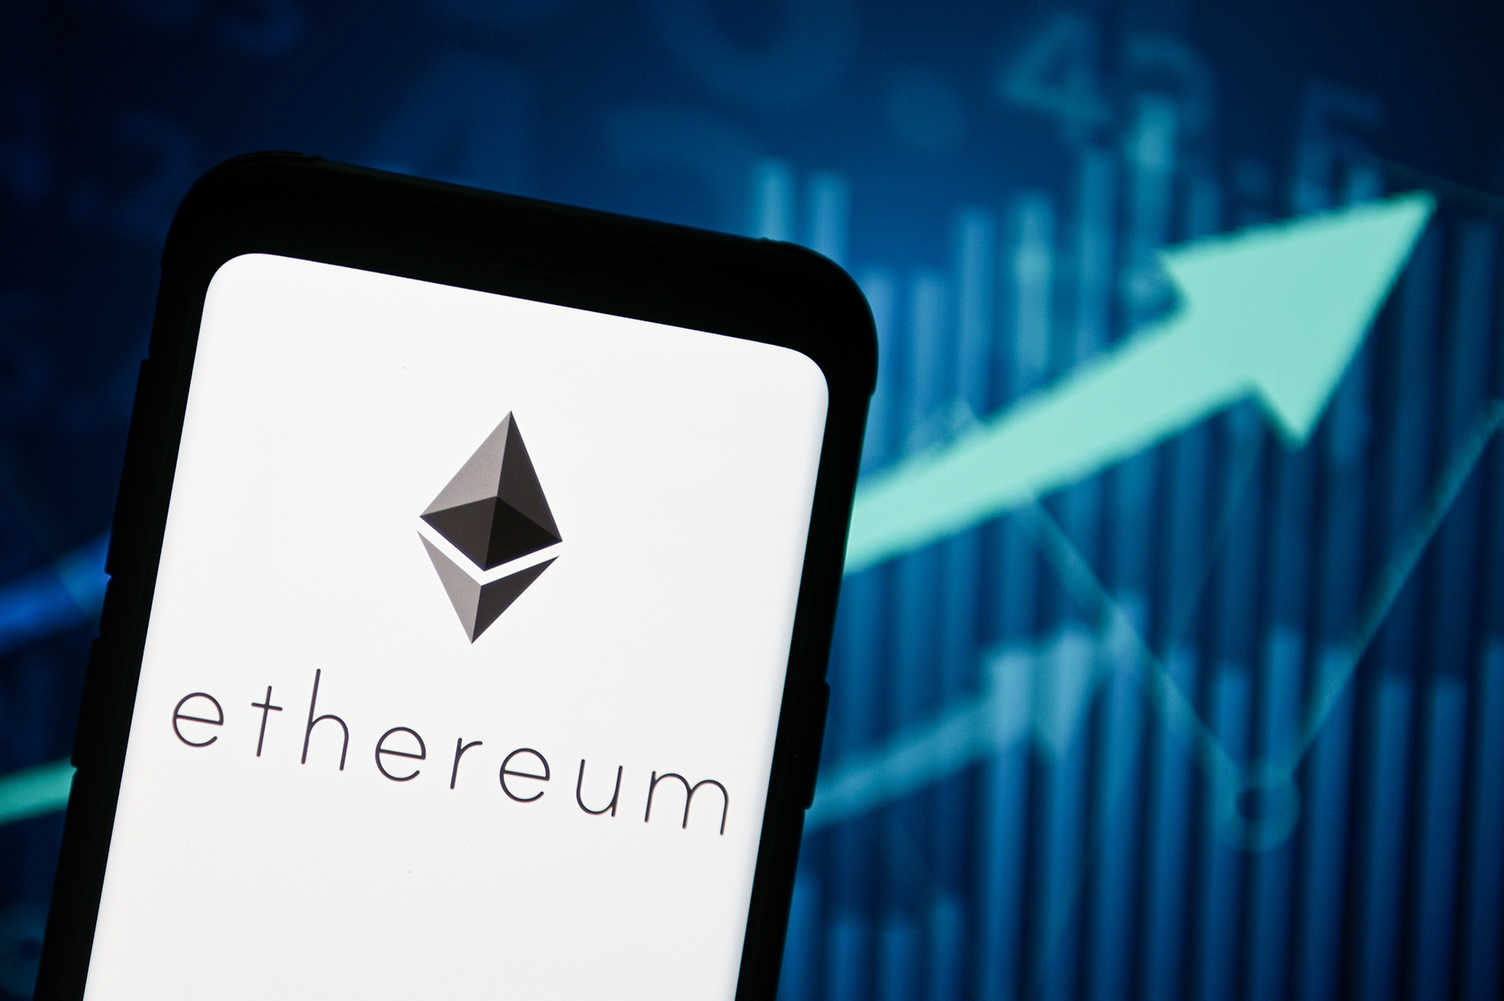 Ethereum was invented by Vitalik Buterin in 2015